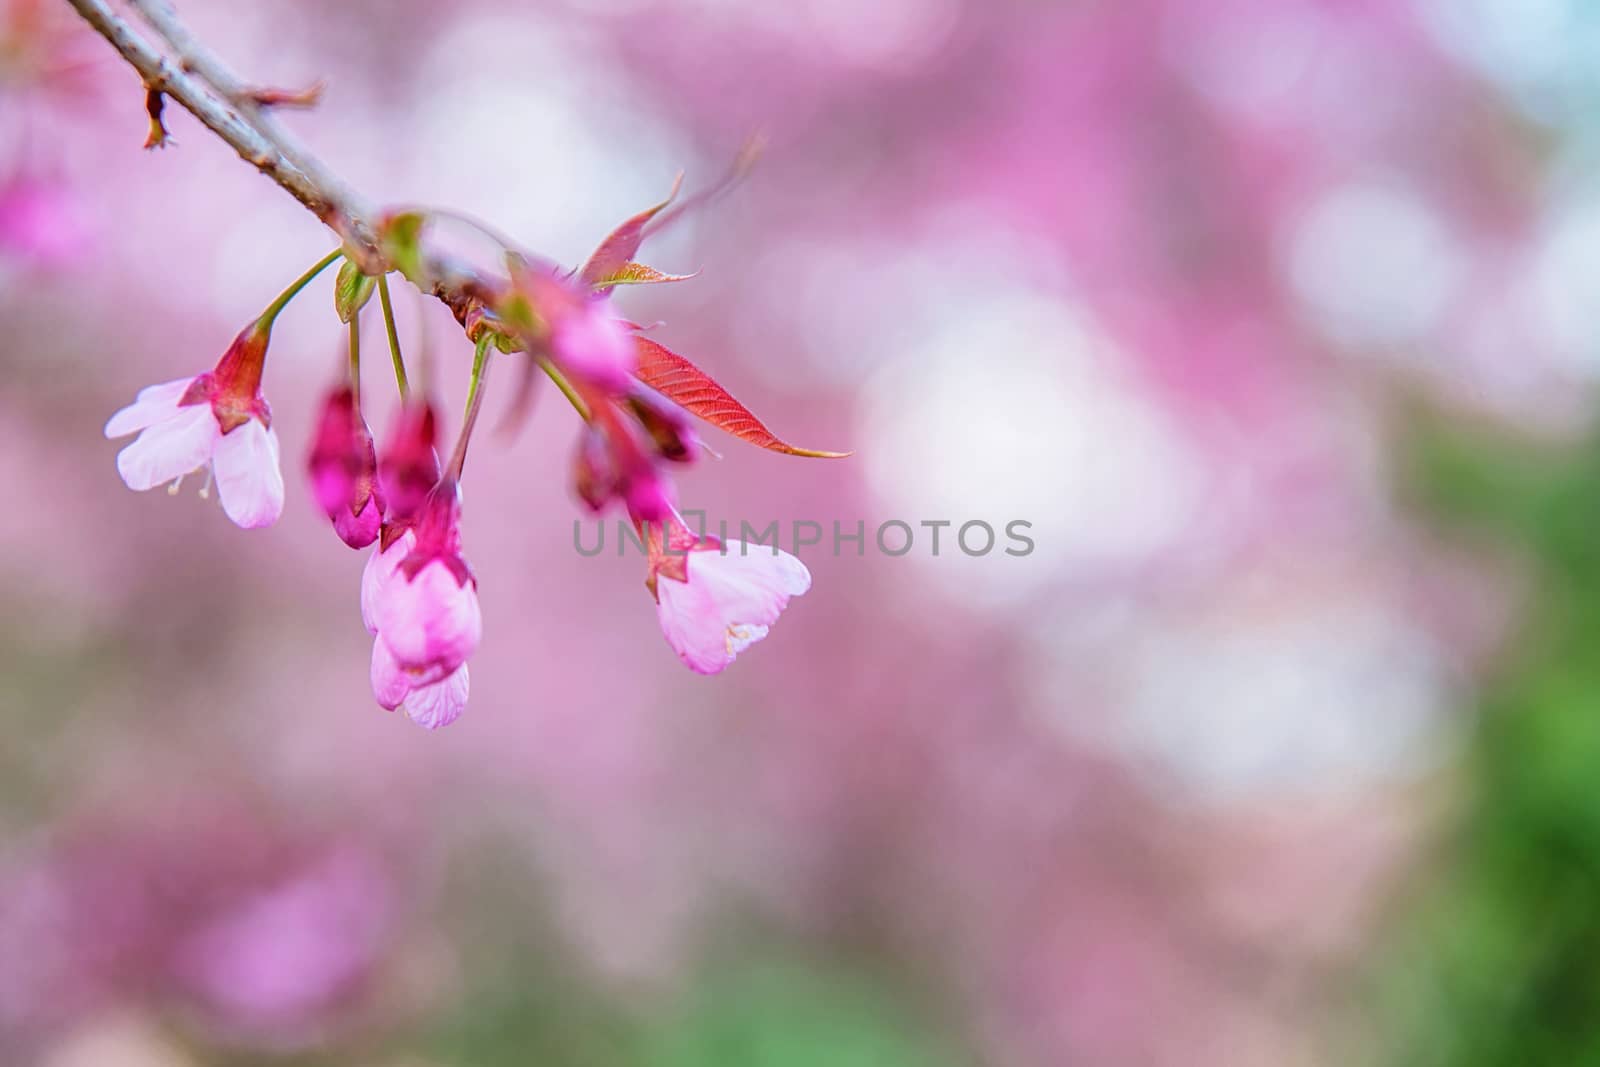 Blossom of Wild Himalayan Cherry (Prunus cerasoides) or Giant tiger flower in Thailand. Selective focus.